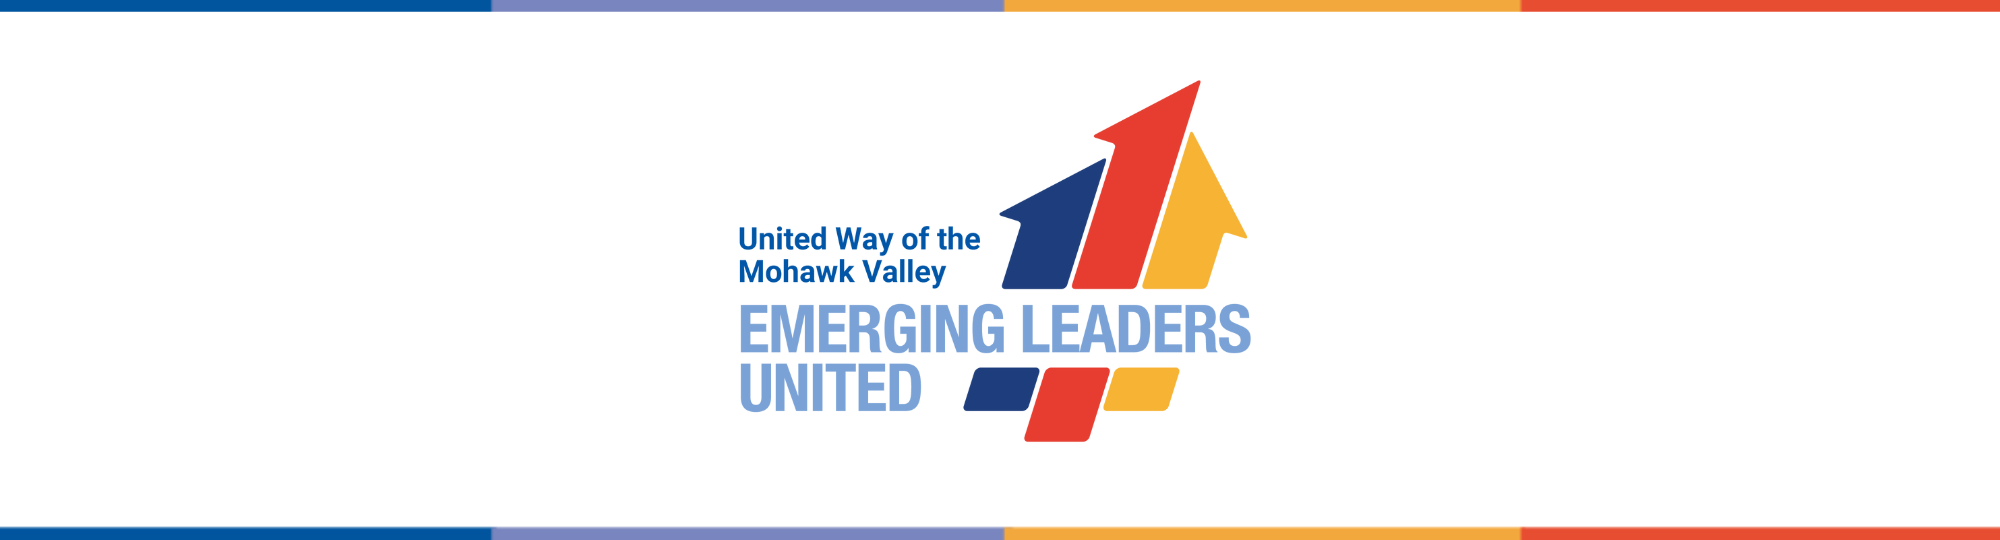 Logo including three arrows points up, merged into one with text of United Way of the Mohawk Valley Emerging Leaders United